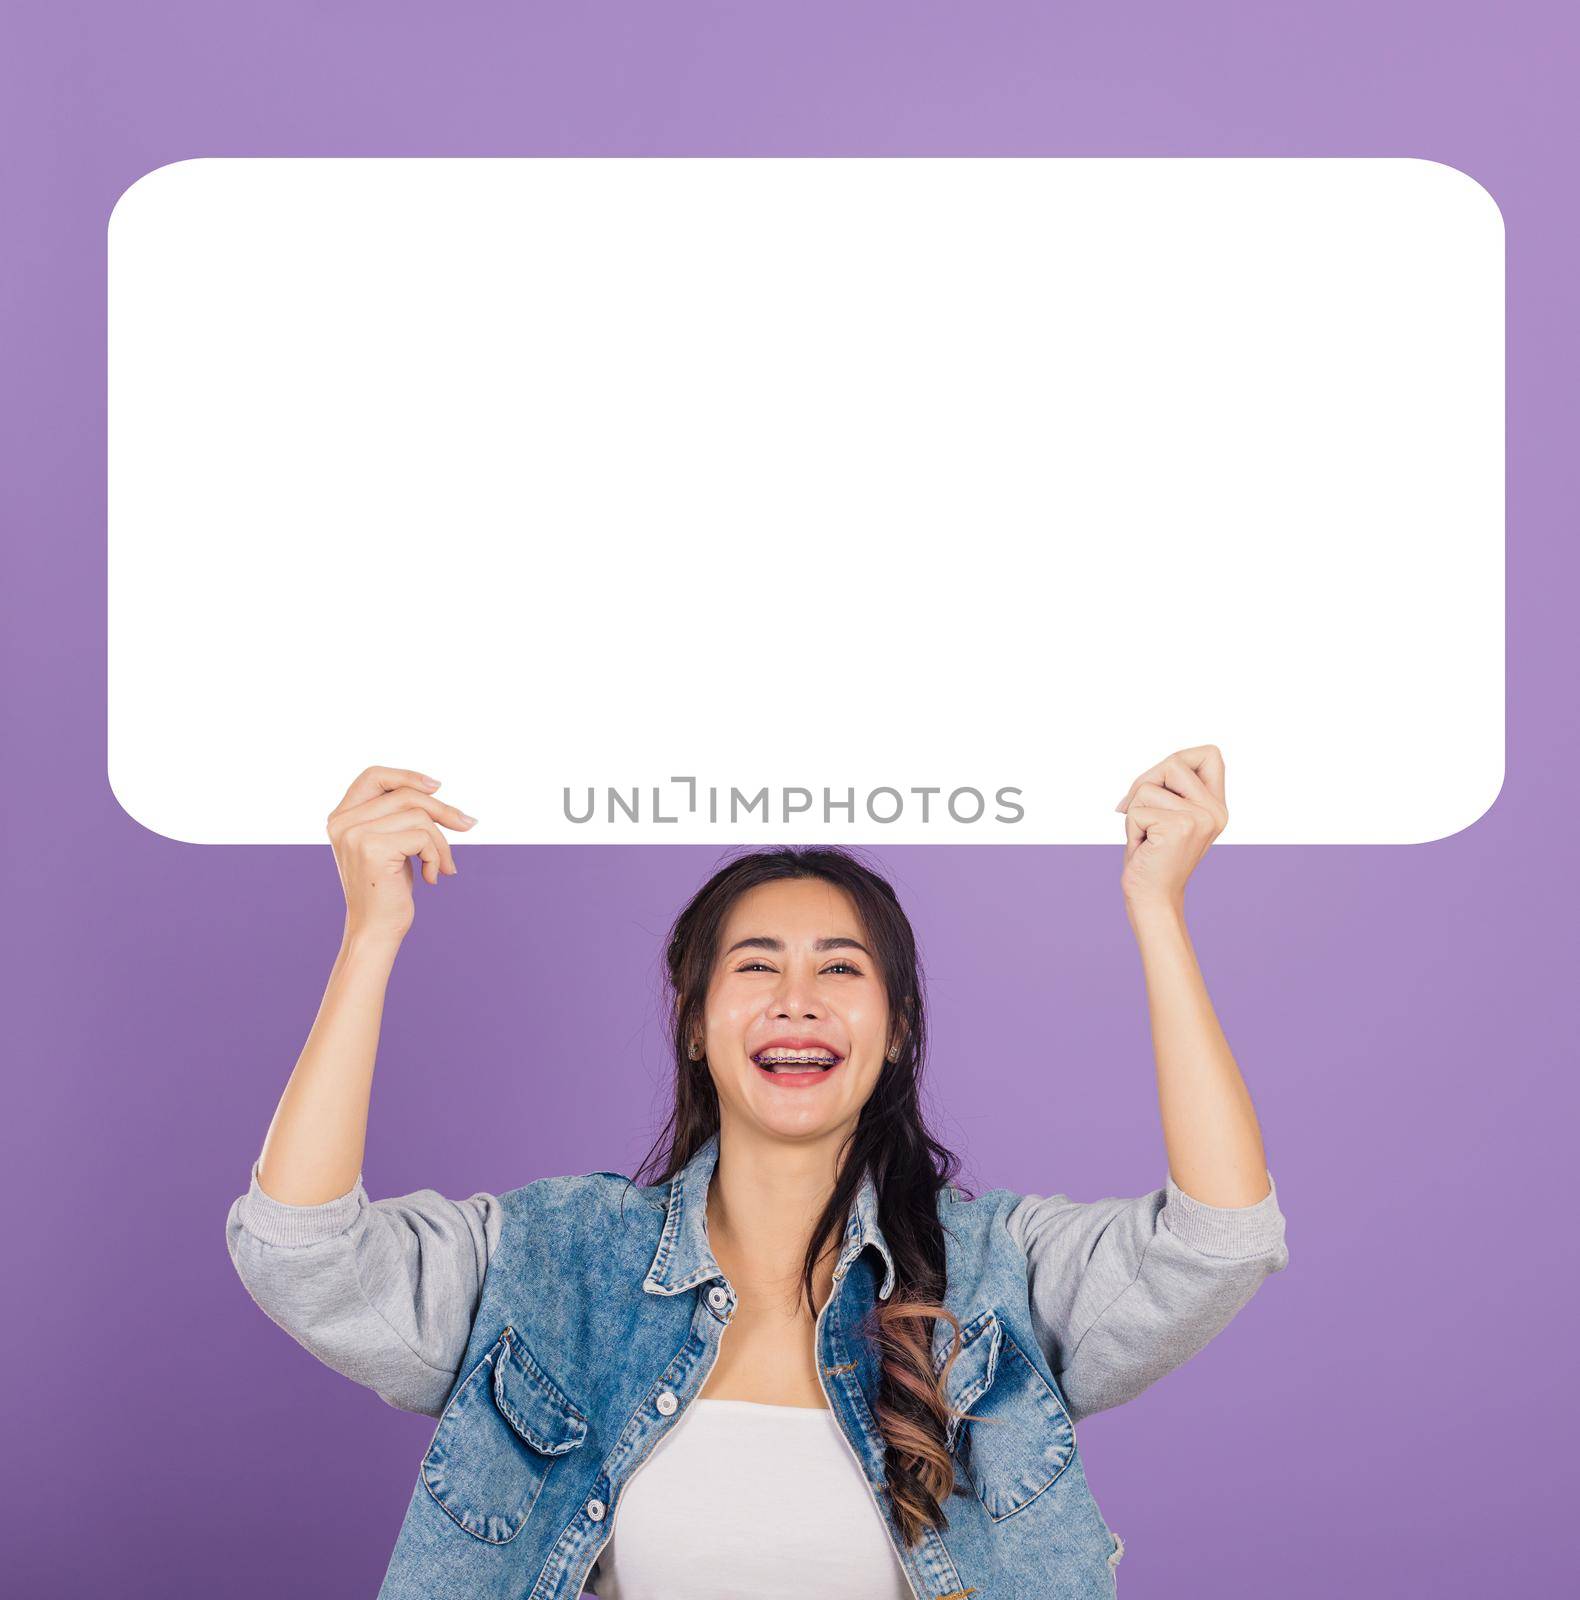 woman smiling excited wear denims hold empty speech bubble sign by Sorapop